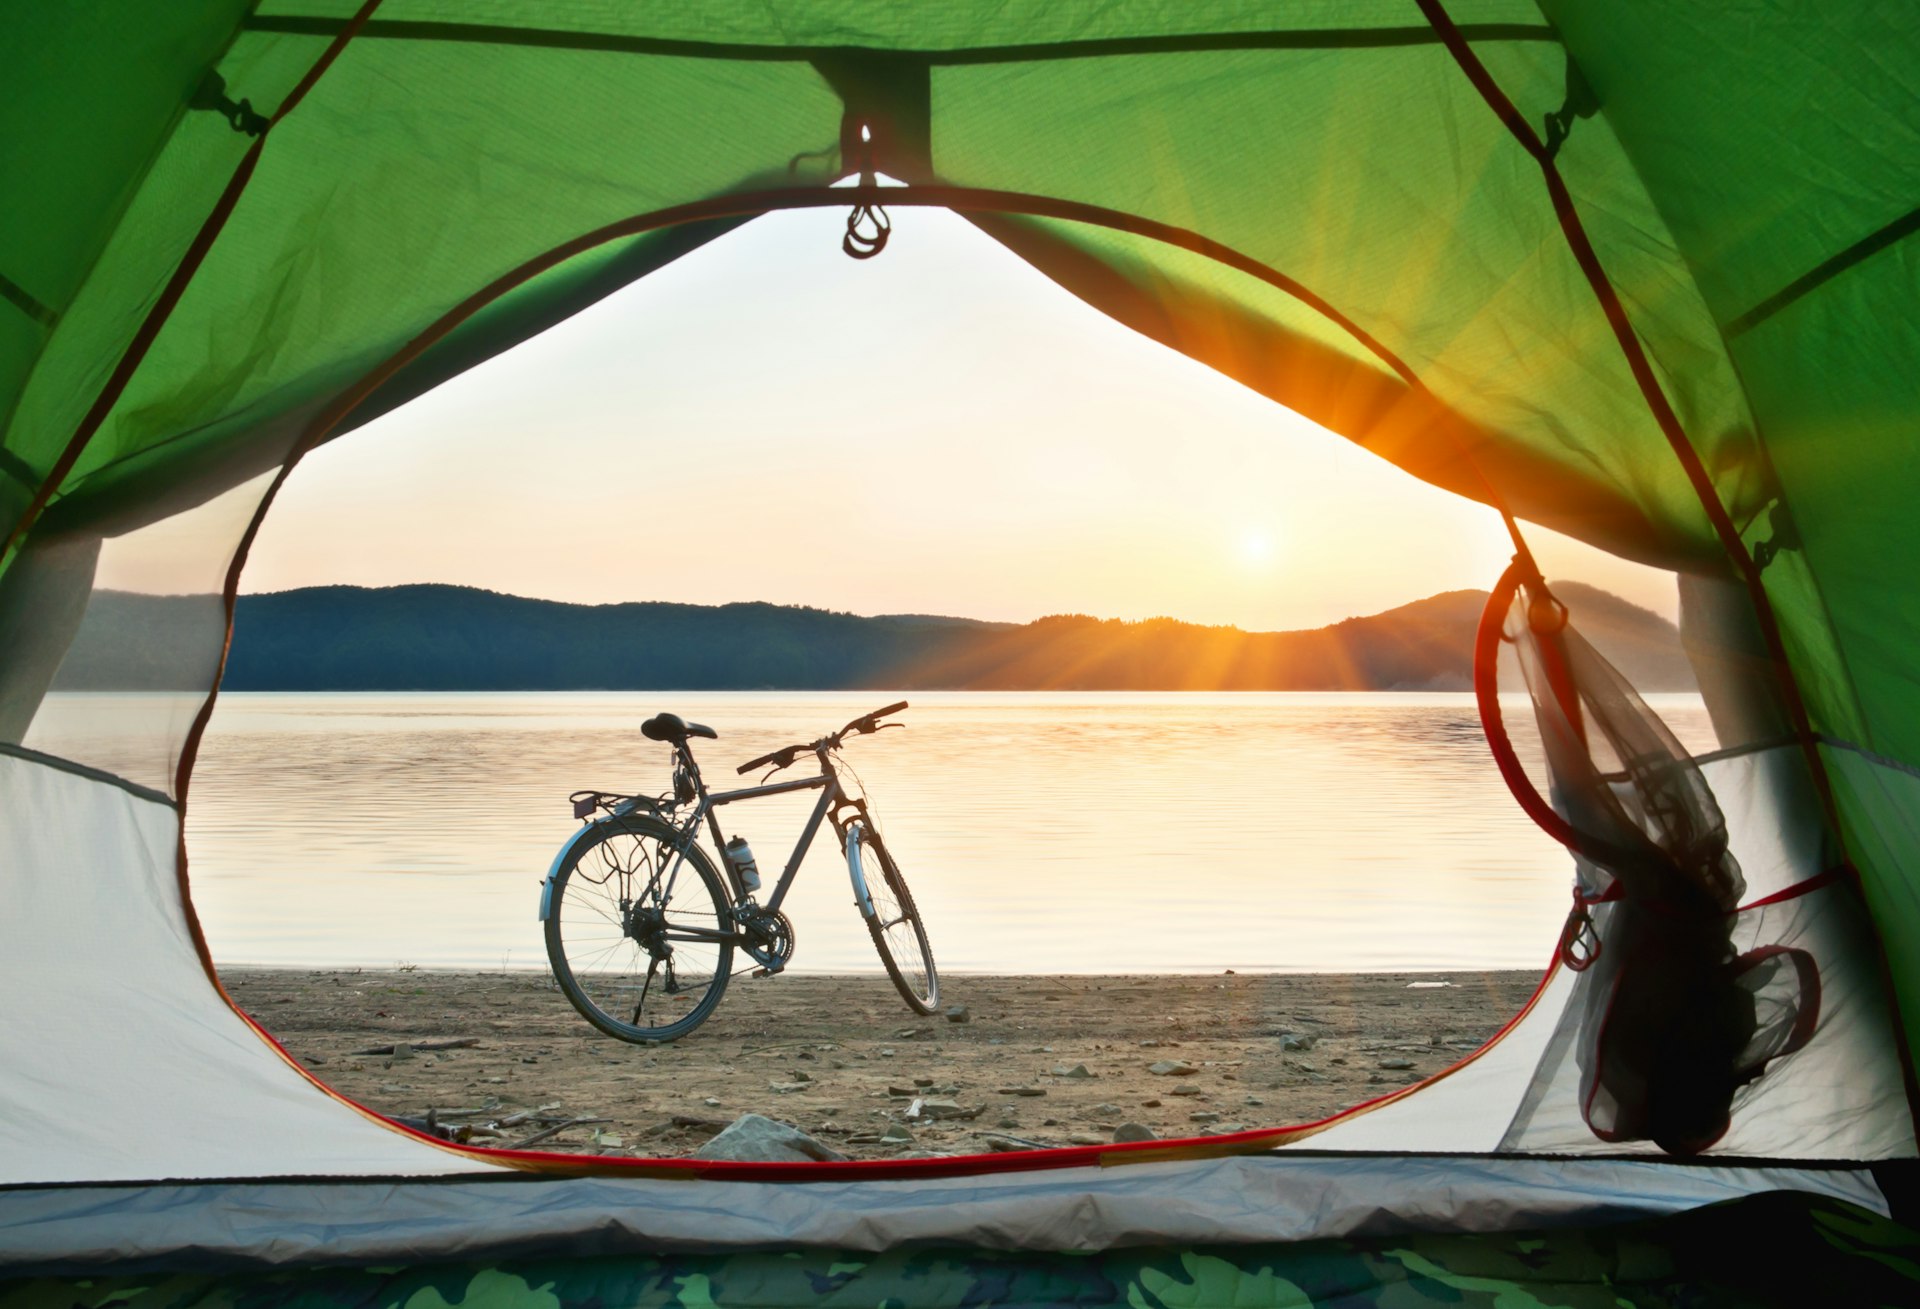 A bicycle on the shore of some water, viewed through the opening in a tent